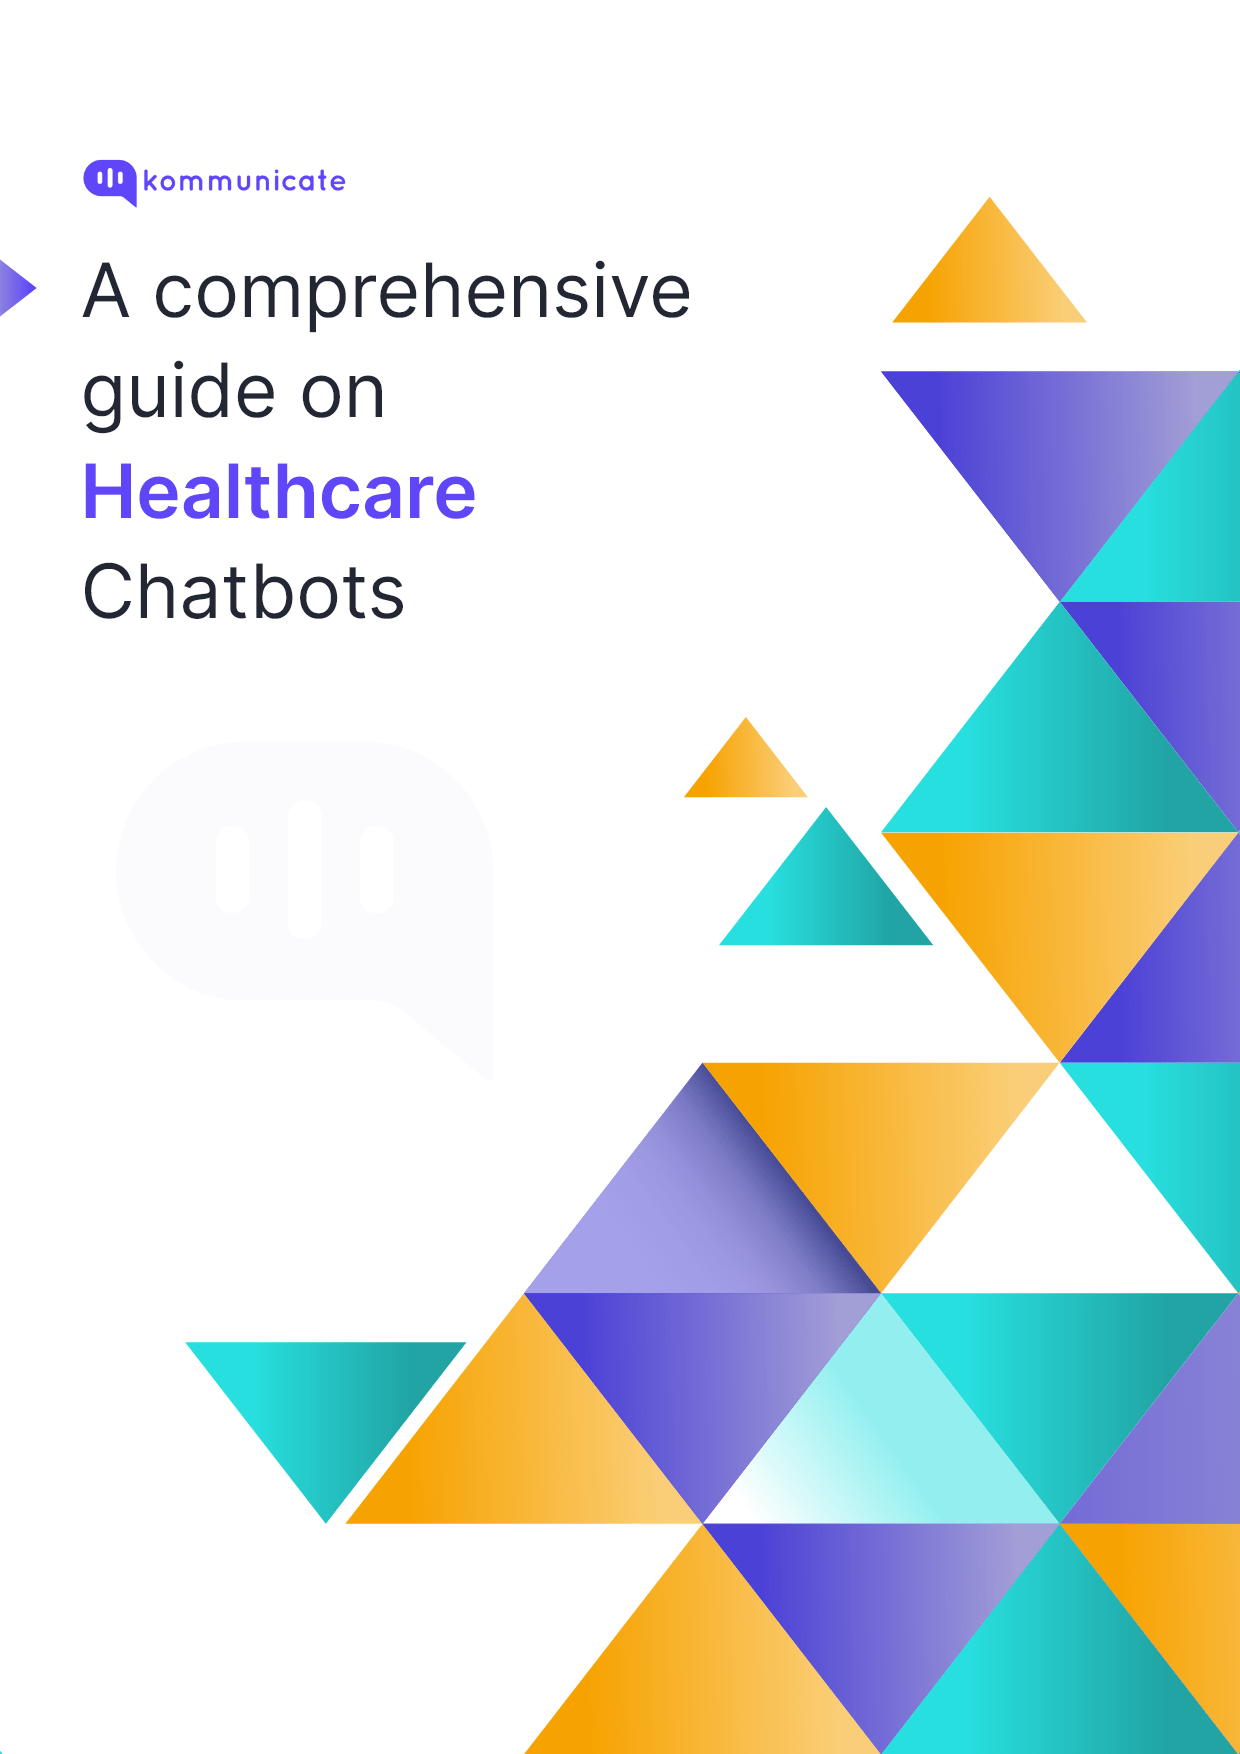 Whitepaper - A comprehensive guide on Healthcare Chatbots